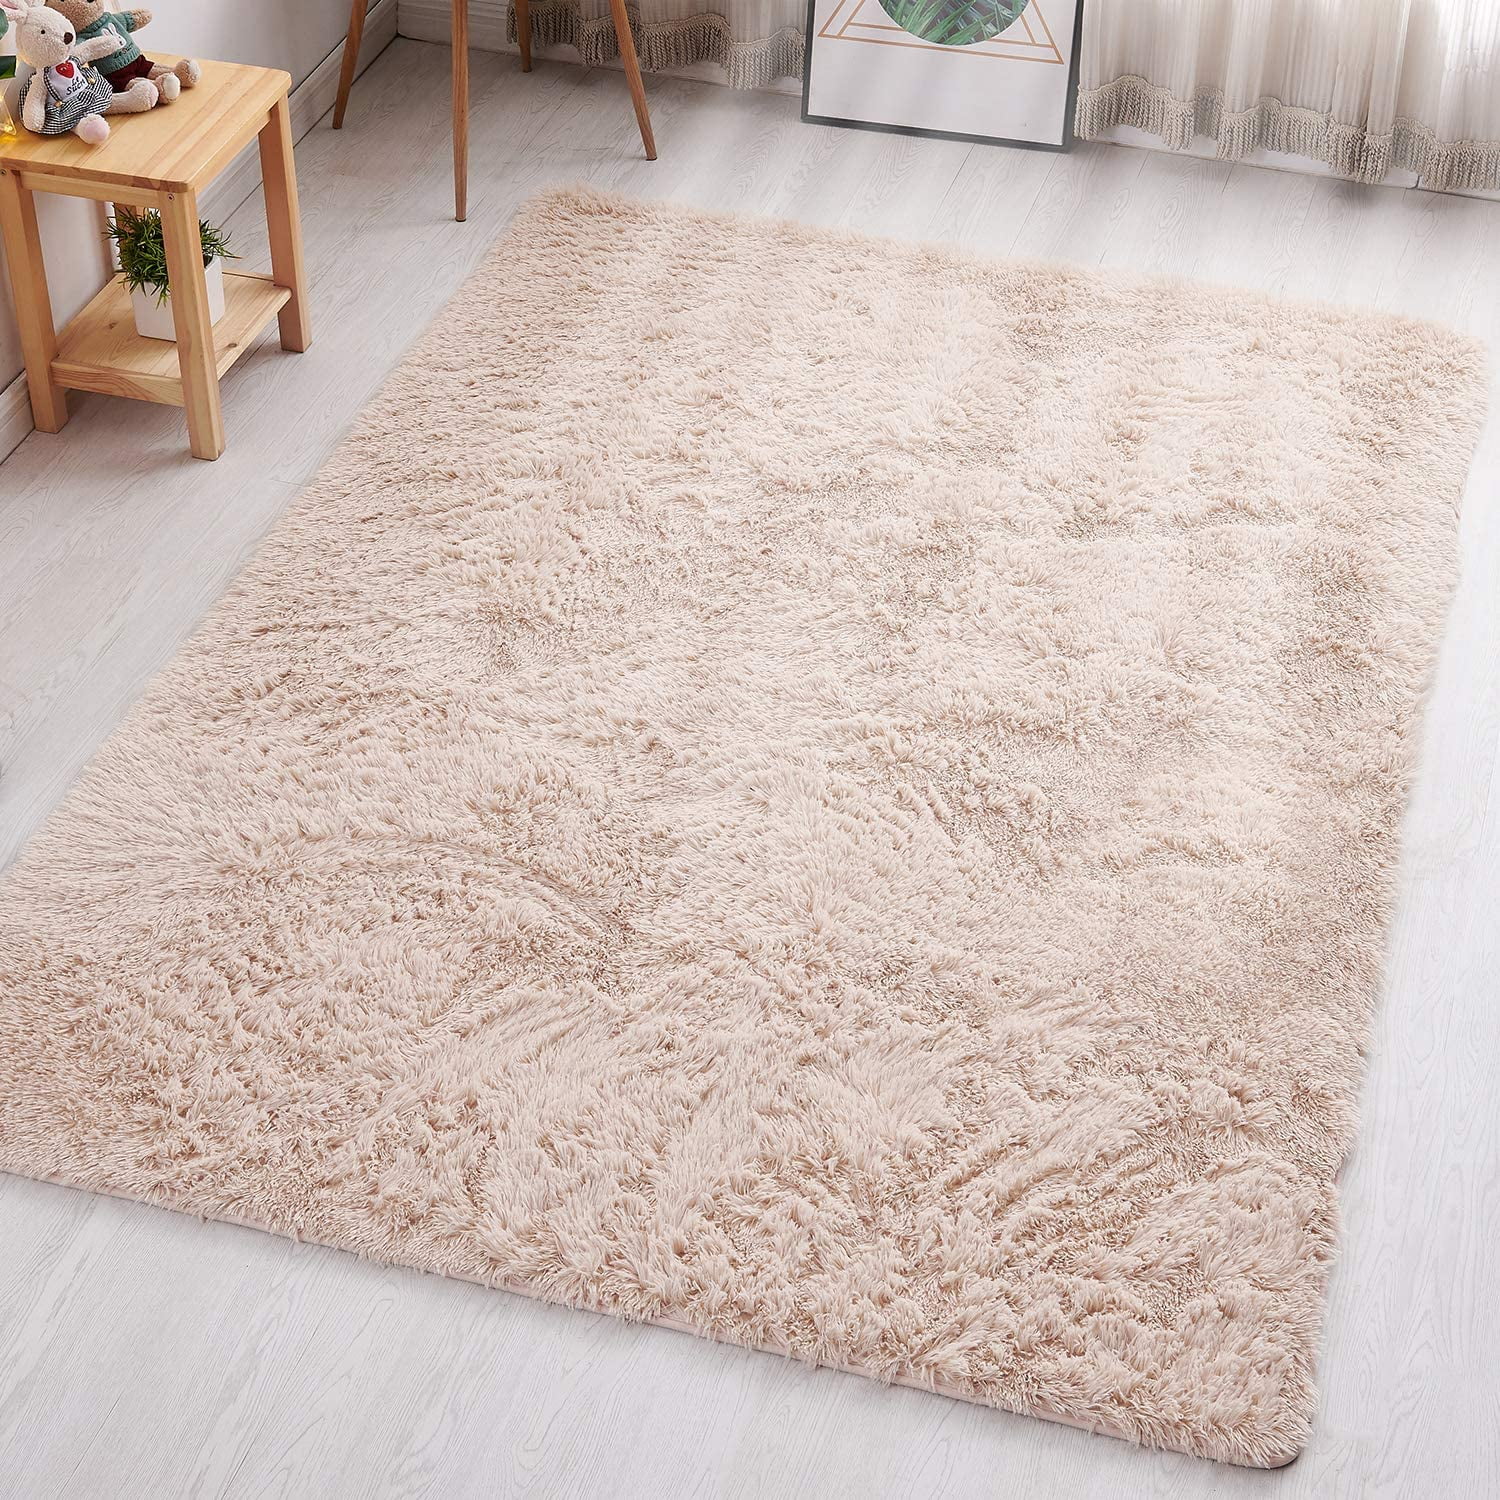 Soft Bedroom Area Rug Animla Flying Birds with Pink Blossom Flowers and Green Leaves Plants Decorative Throw Rug for Indoor Floor Carpet，Non Slip Carpets Rugs for Living Room 4ft 